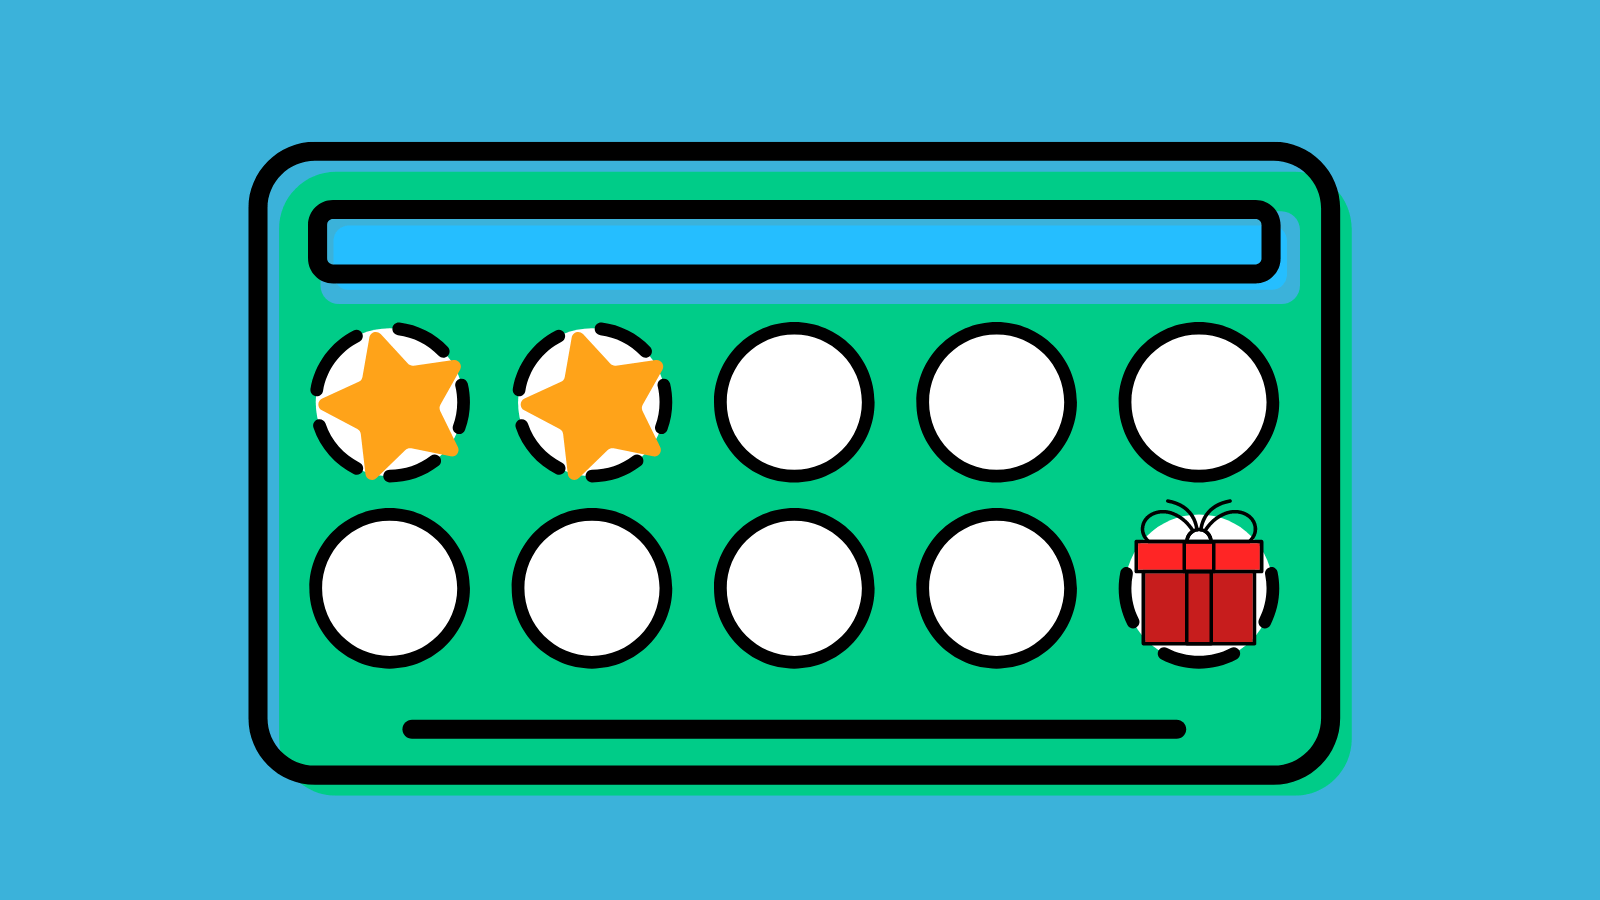 A punch card with two stars